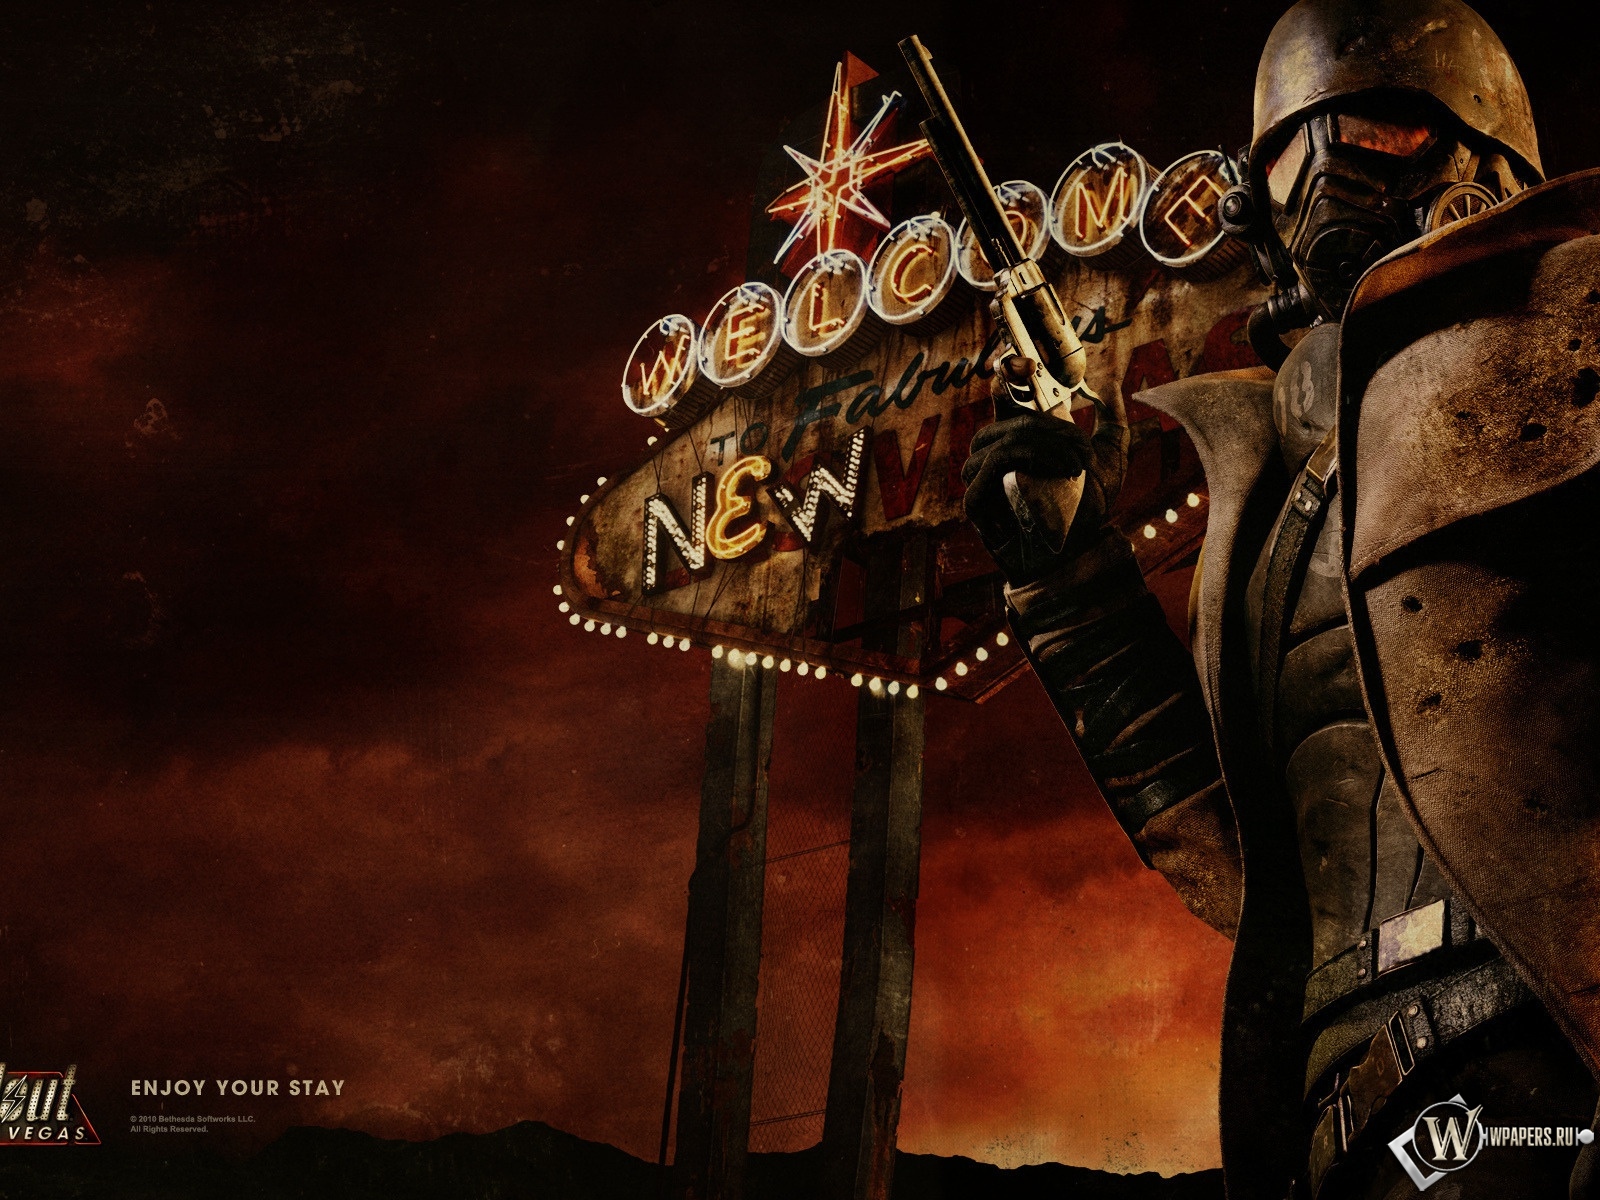 for ipod download Fallout: New Vegas